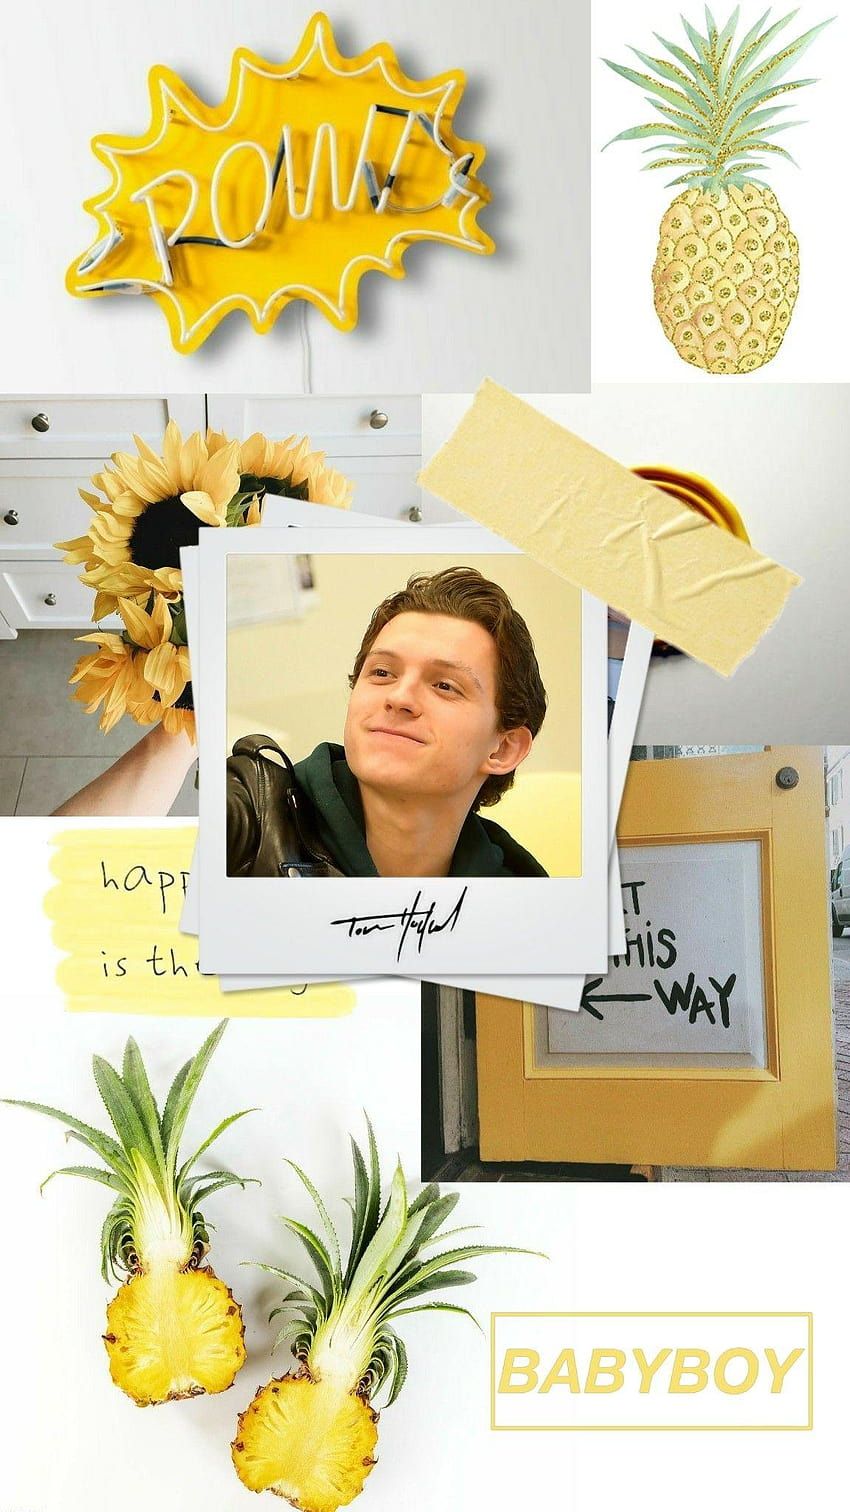 Aesthetic tom holland collage - Tom Holland